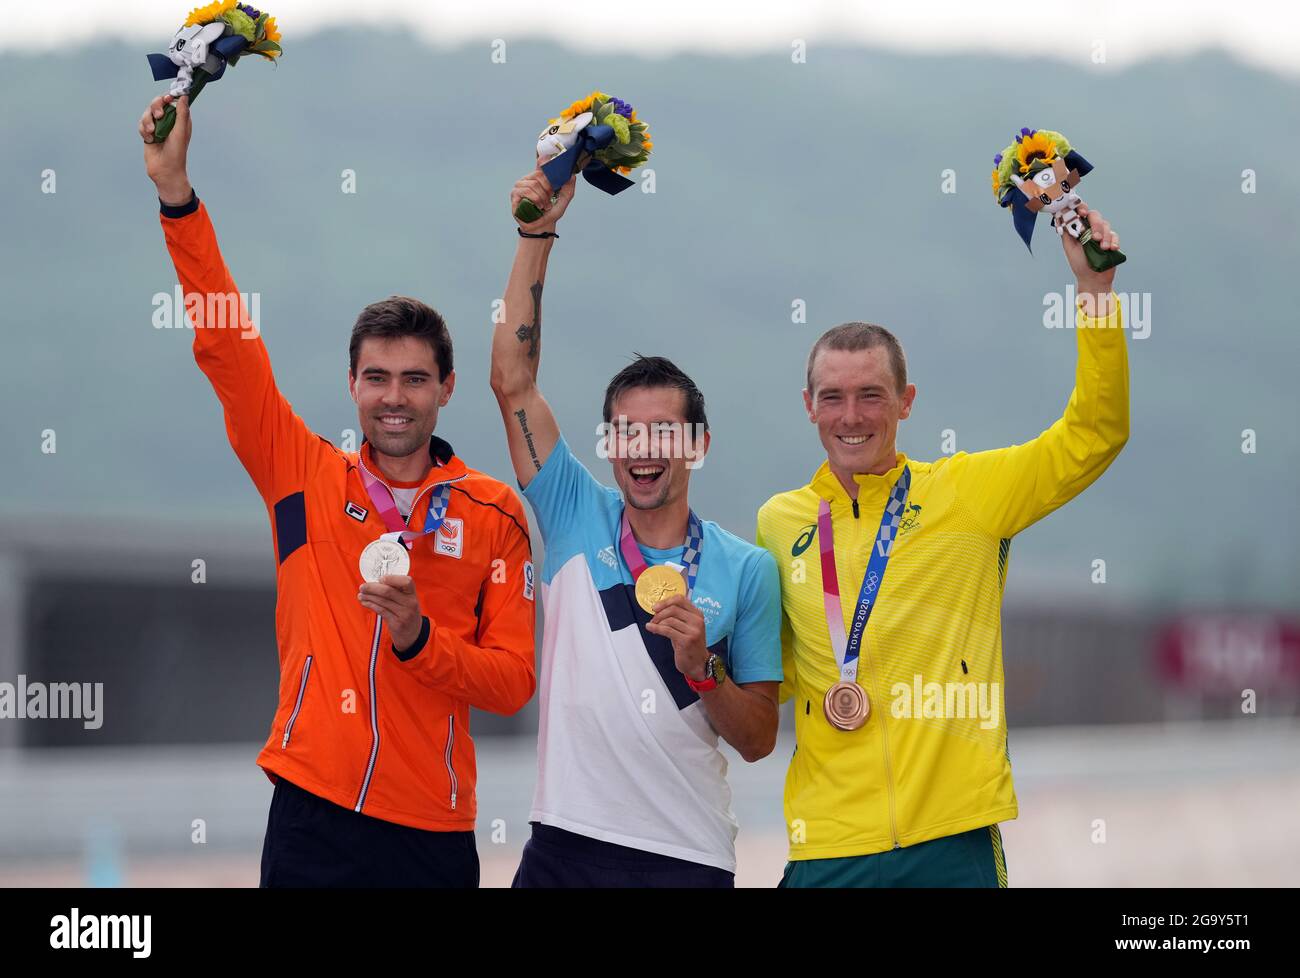 Slovenia's Primoz Roglic celebrates winning Gold (centre), Netherland's Tom Dumoulin celebrates winning Silver (left) and Australia's Rohan Dennis celebrates winning Bronze during the Men's Individual Time Trial at the Fuji International Speedway on the fifth day of the Tokyo 2020 Olympic Games in Japan. Picture date: Wednesday July 28, 2021. Stock Photo